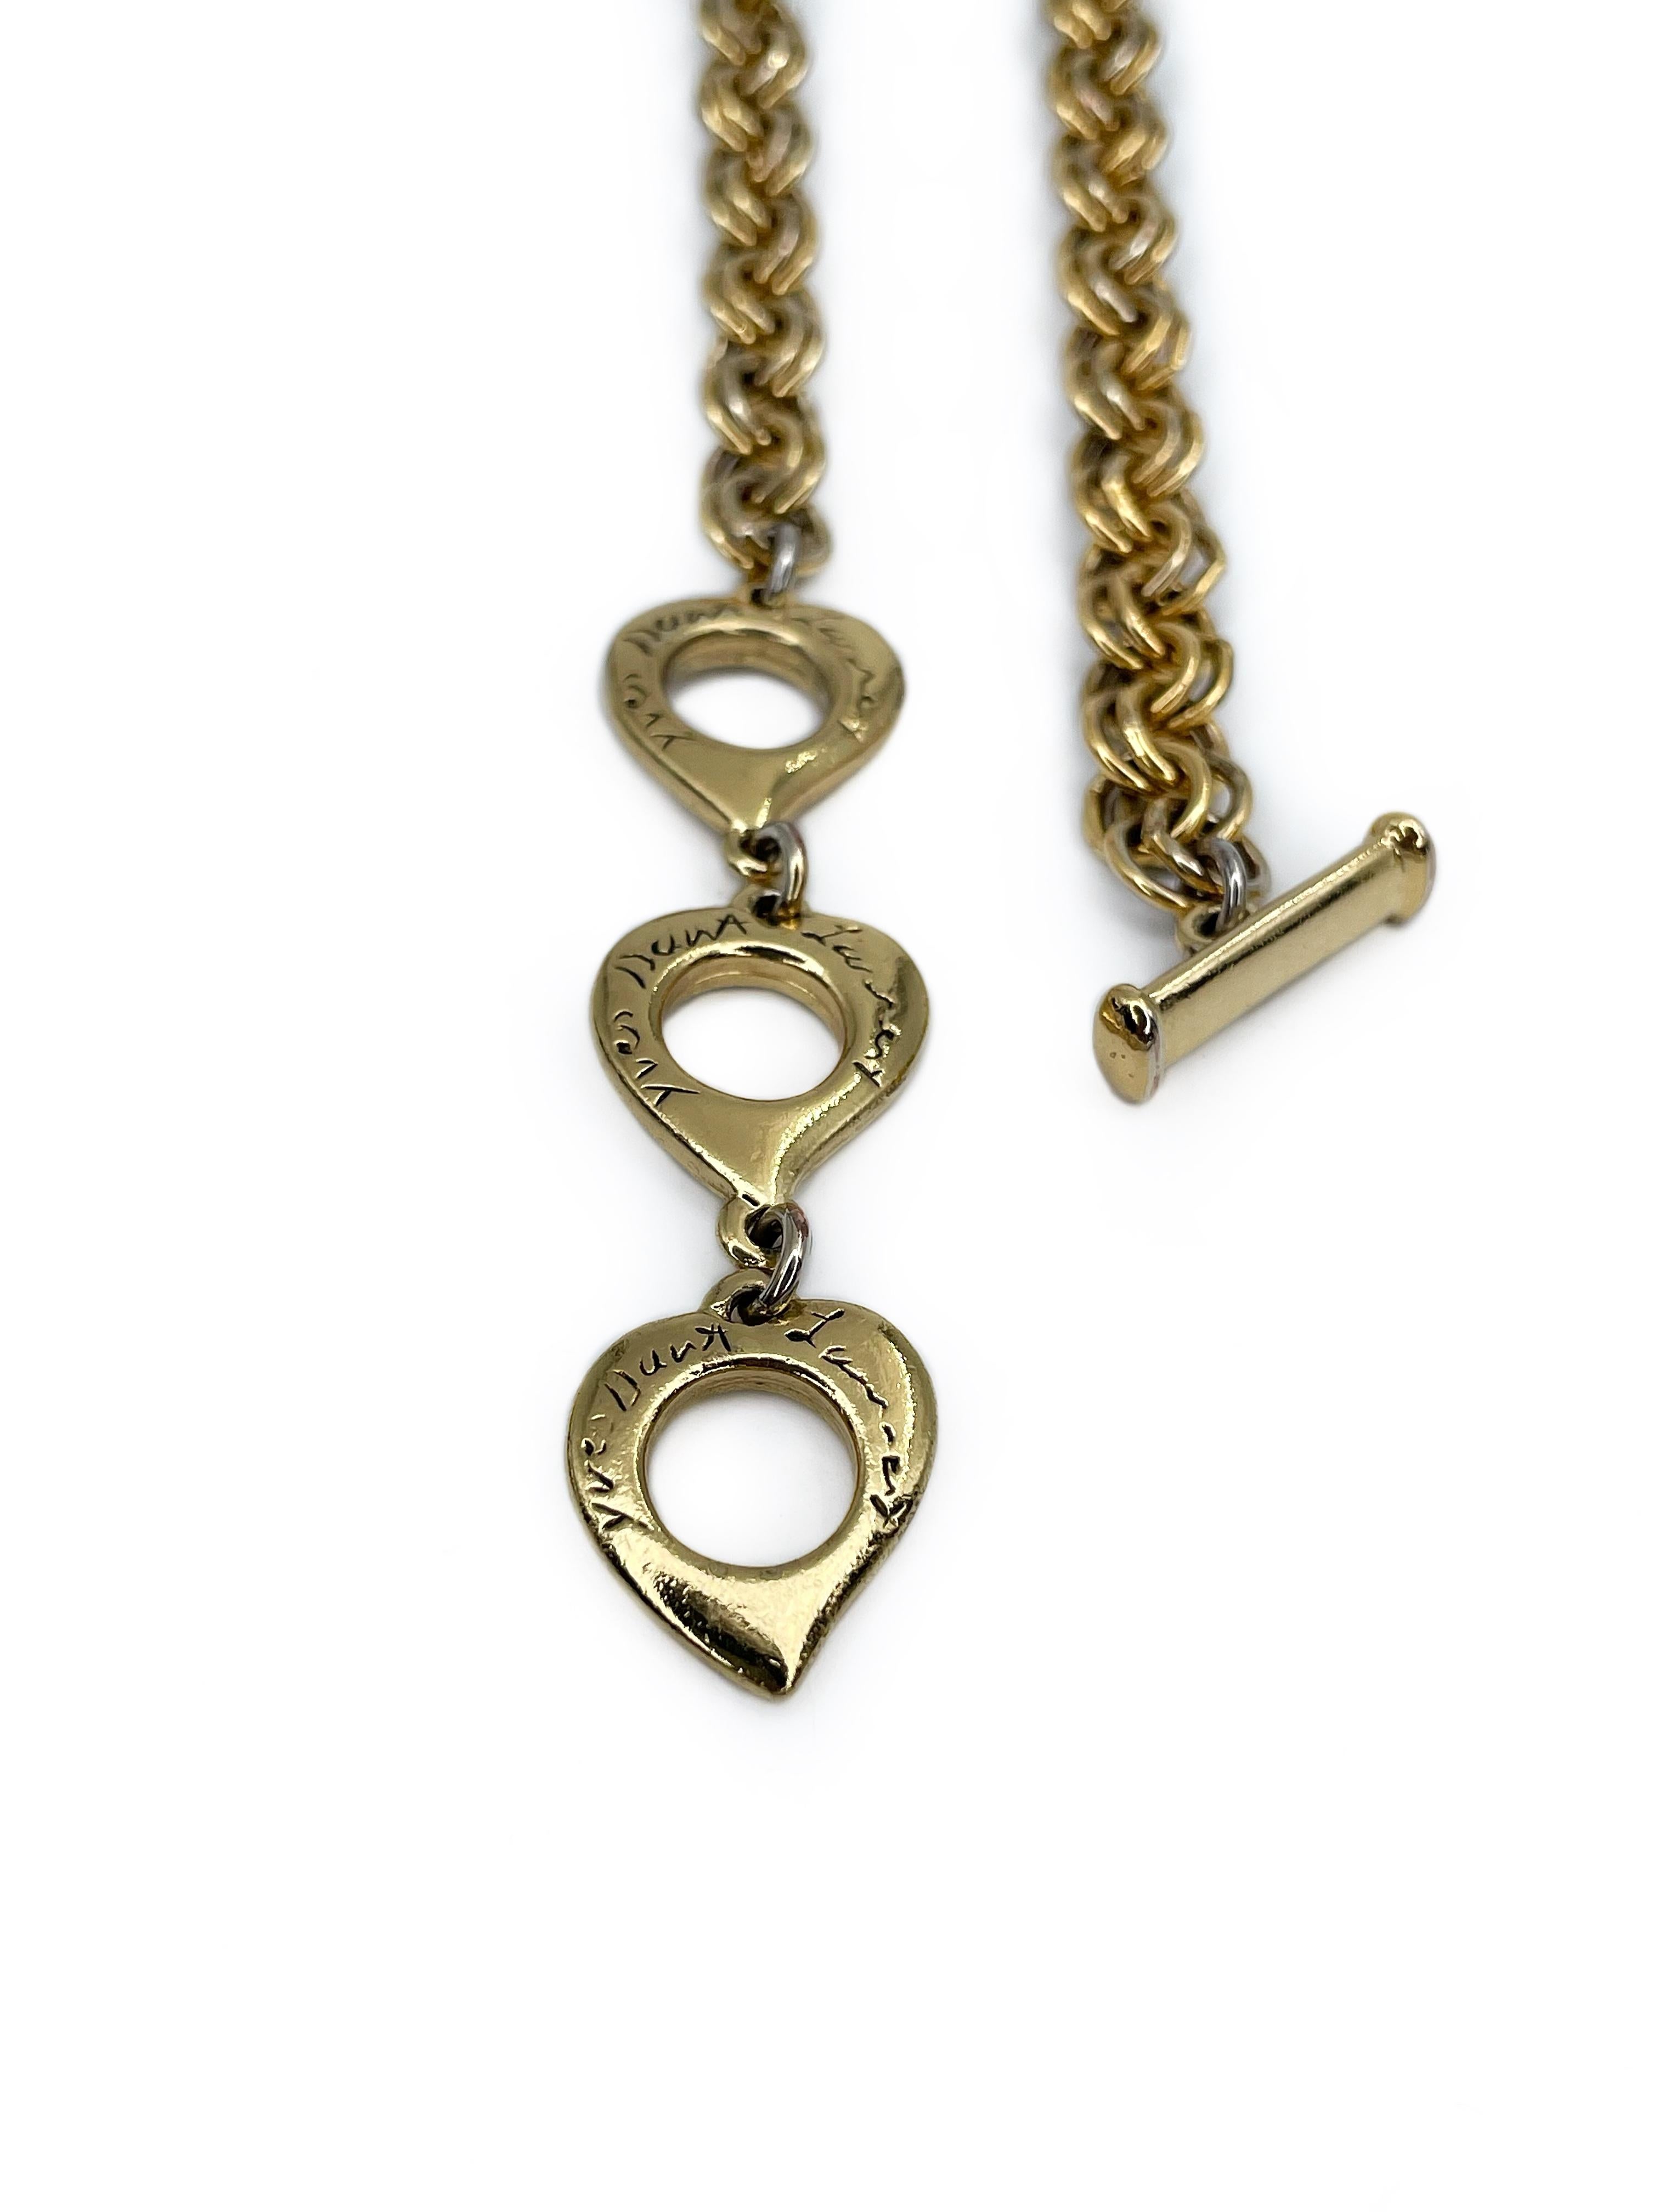 Women's 1980s Vintage Yves Saint Laurent YSL Gold Tone Three Heart Chain Necklace